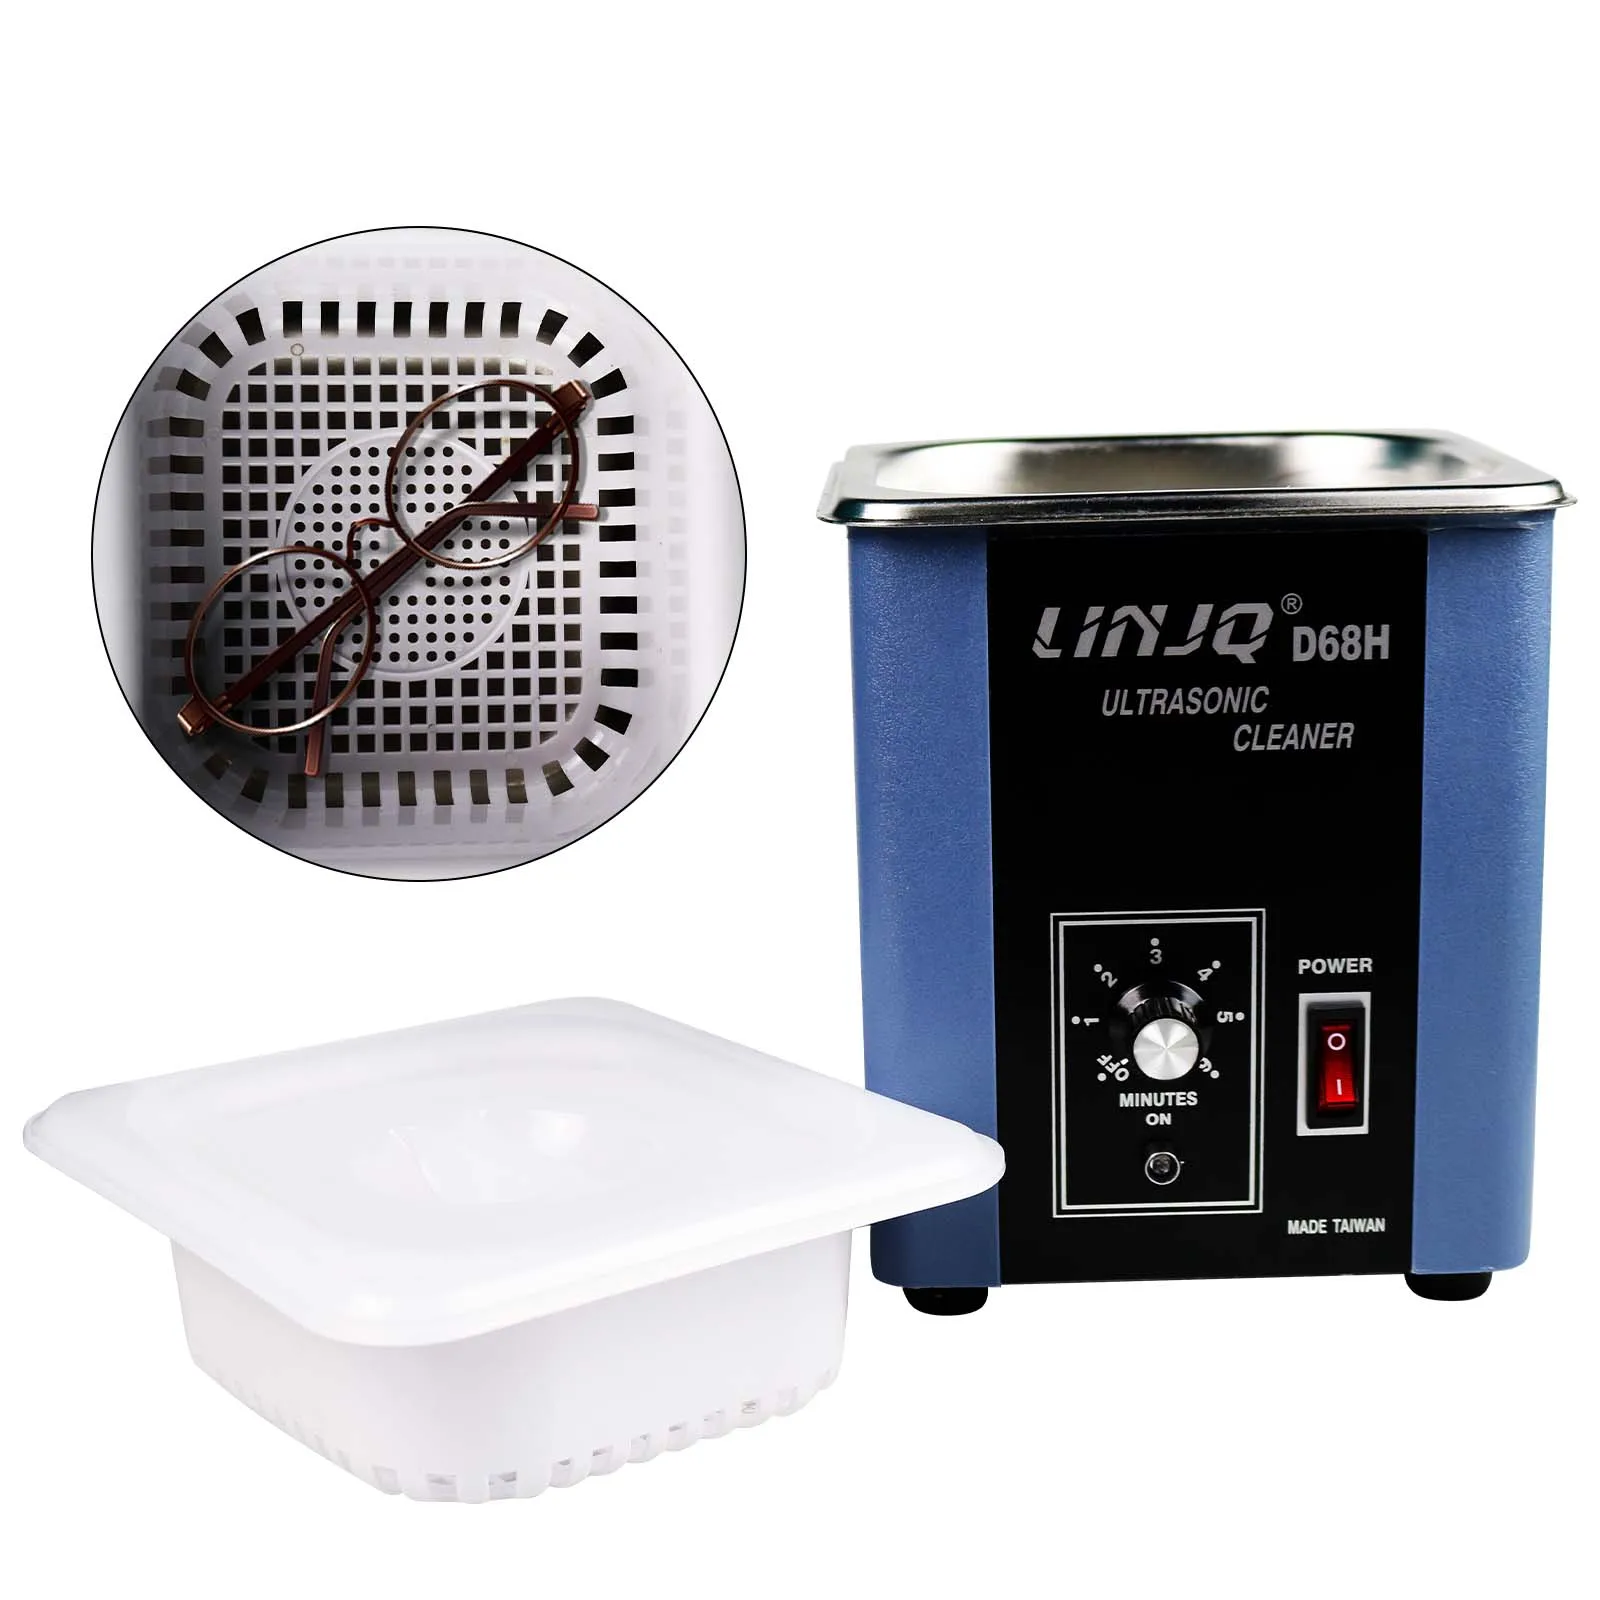 16l-ultrasonic-cleaning-device-used-for-cleaning-glass-items-watch-components-small-parts-circuit-boards-for-professional